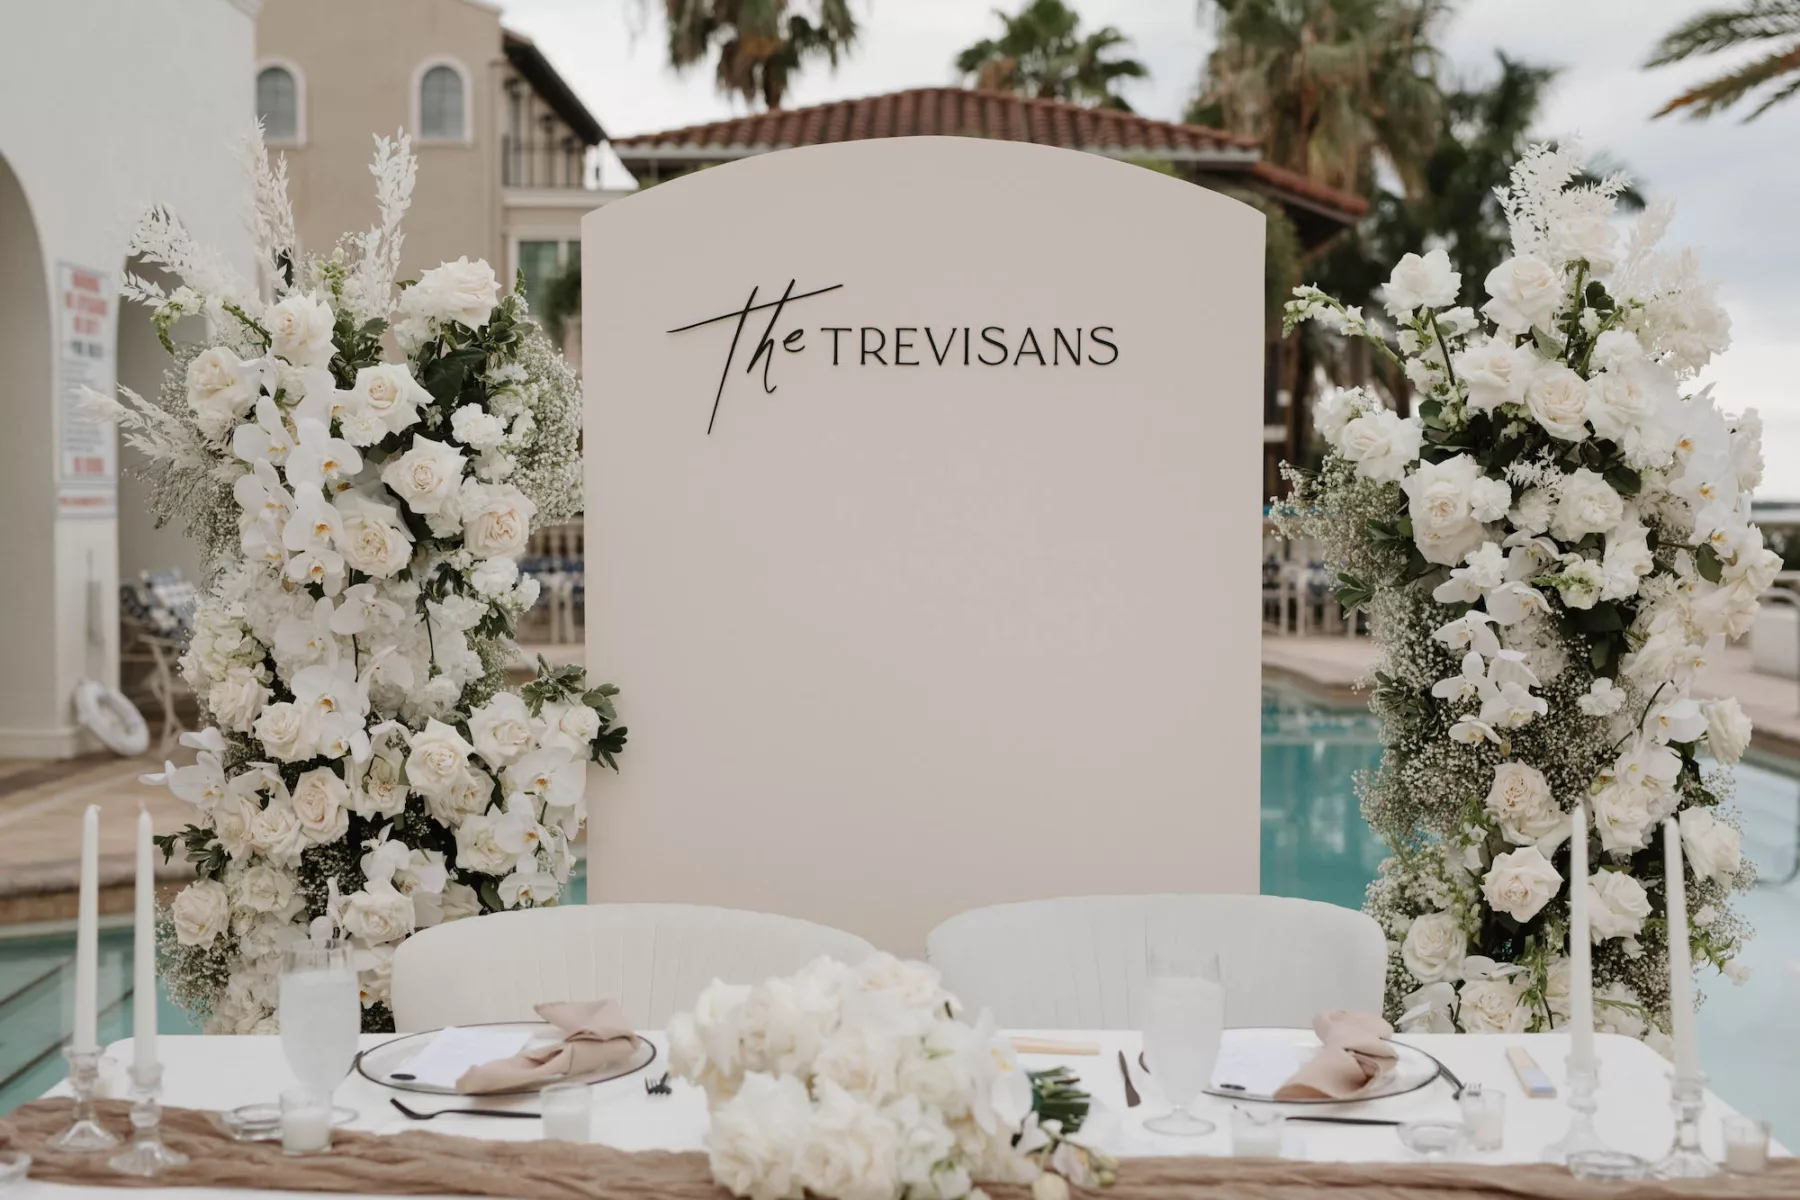 Modern Monochromatic Outdoor Oceanview Spring Wedding Reception Sweetheart Table Decor Inspiration | White Arch Backdrop | Tall Flower Arrangements with White Roses, Carnations, Baby's Breath, and Orchids | White Velvet Chairs | Tampa Bay Kate Ryan Event Rentals